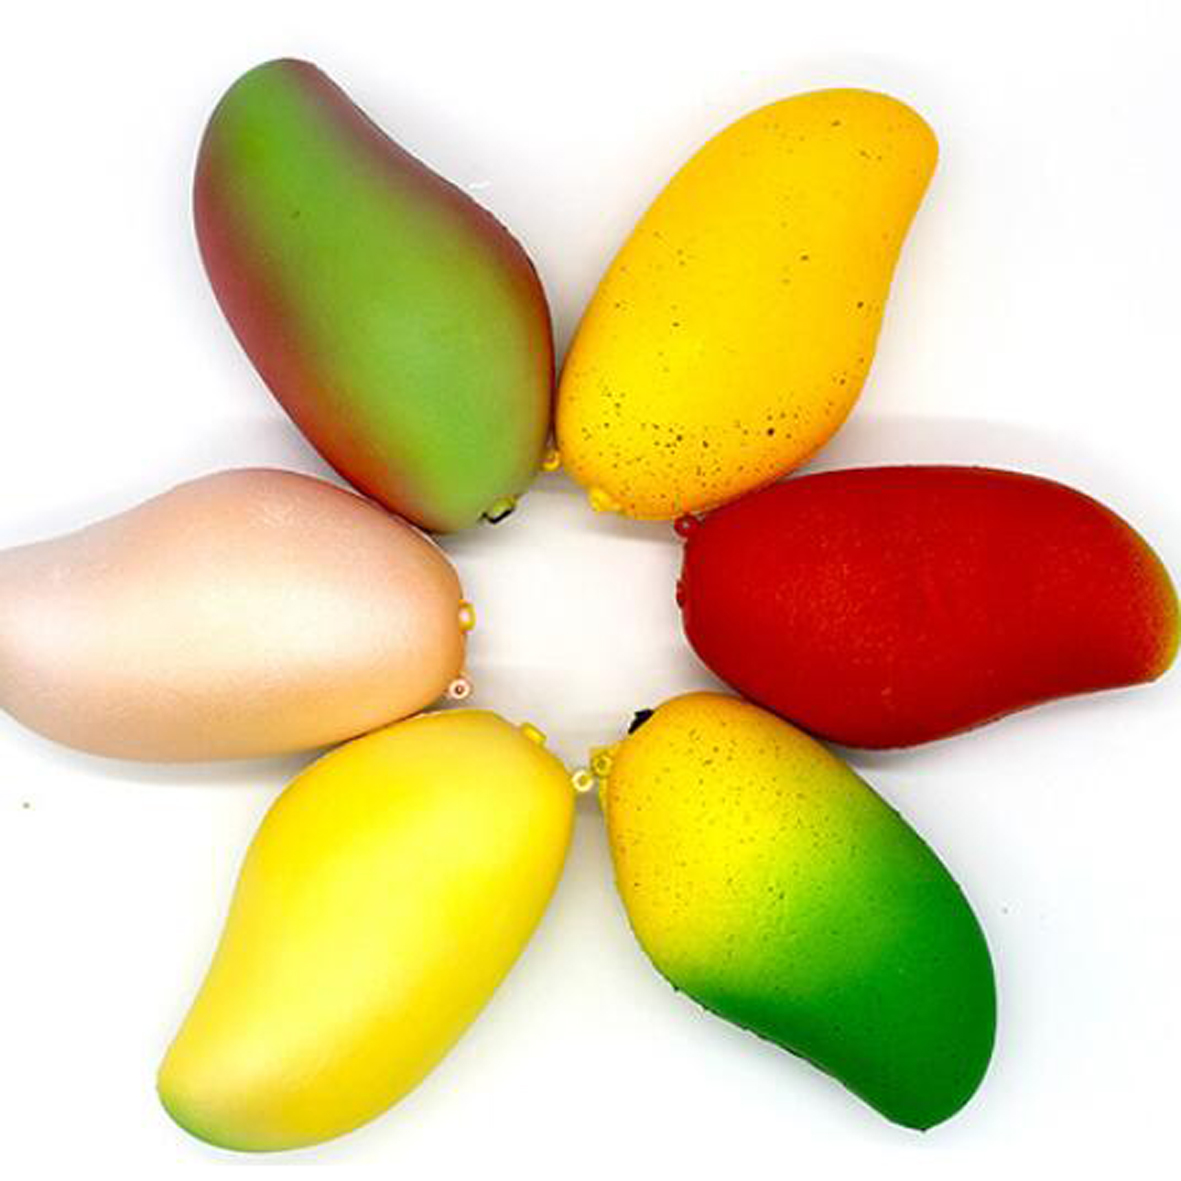 GL-ELY1205 Fruit Mango Shaped Slow Release Stress Reliever